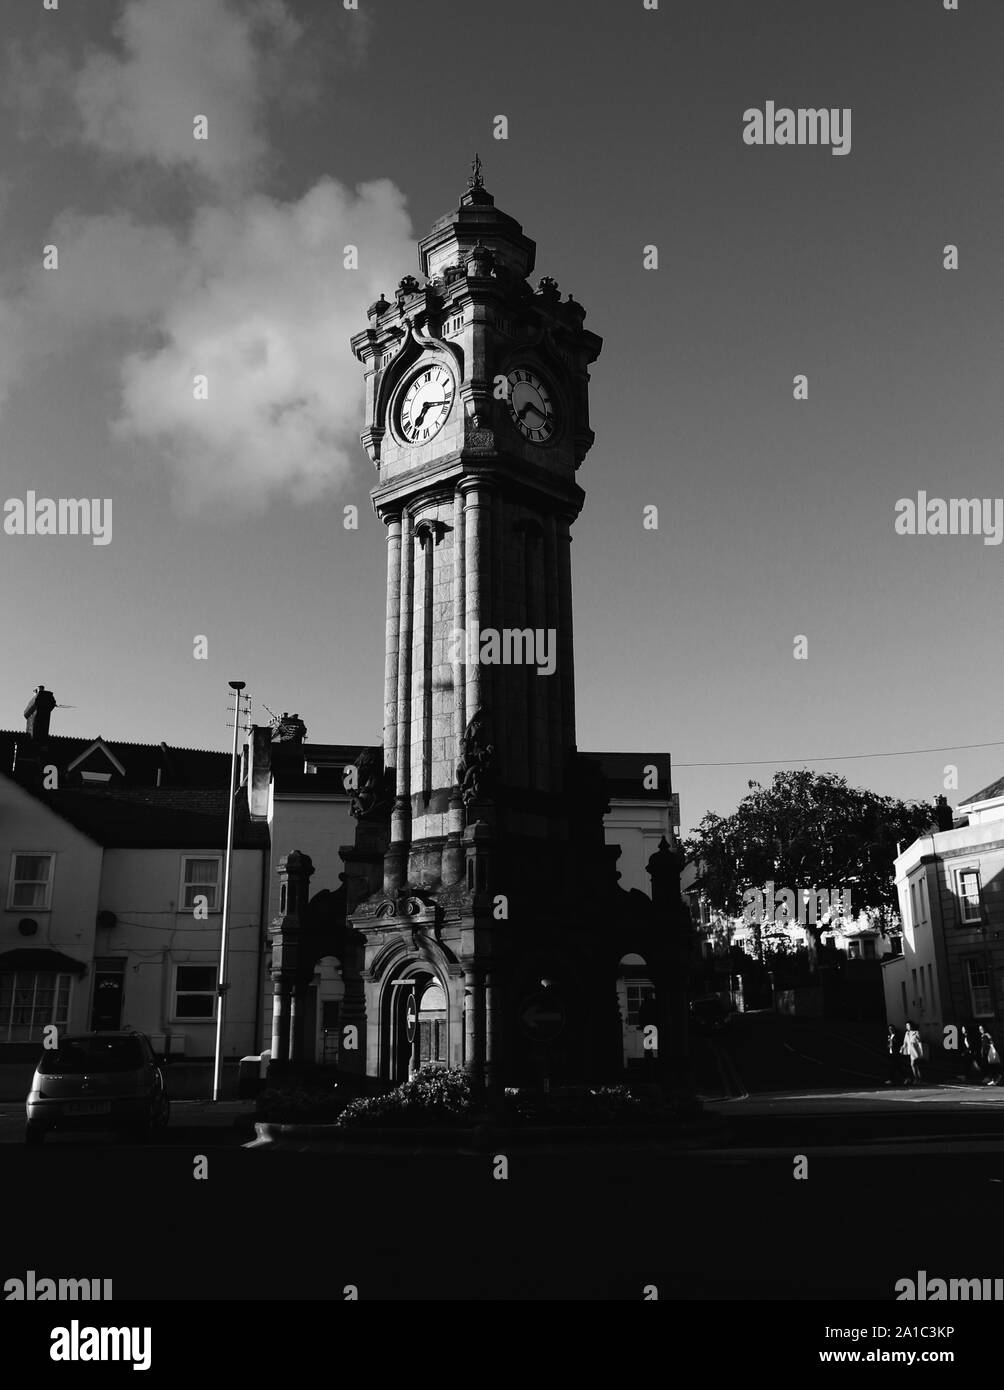 Exploring exeter Black and White Stock Photos & Images - Alamy